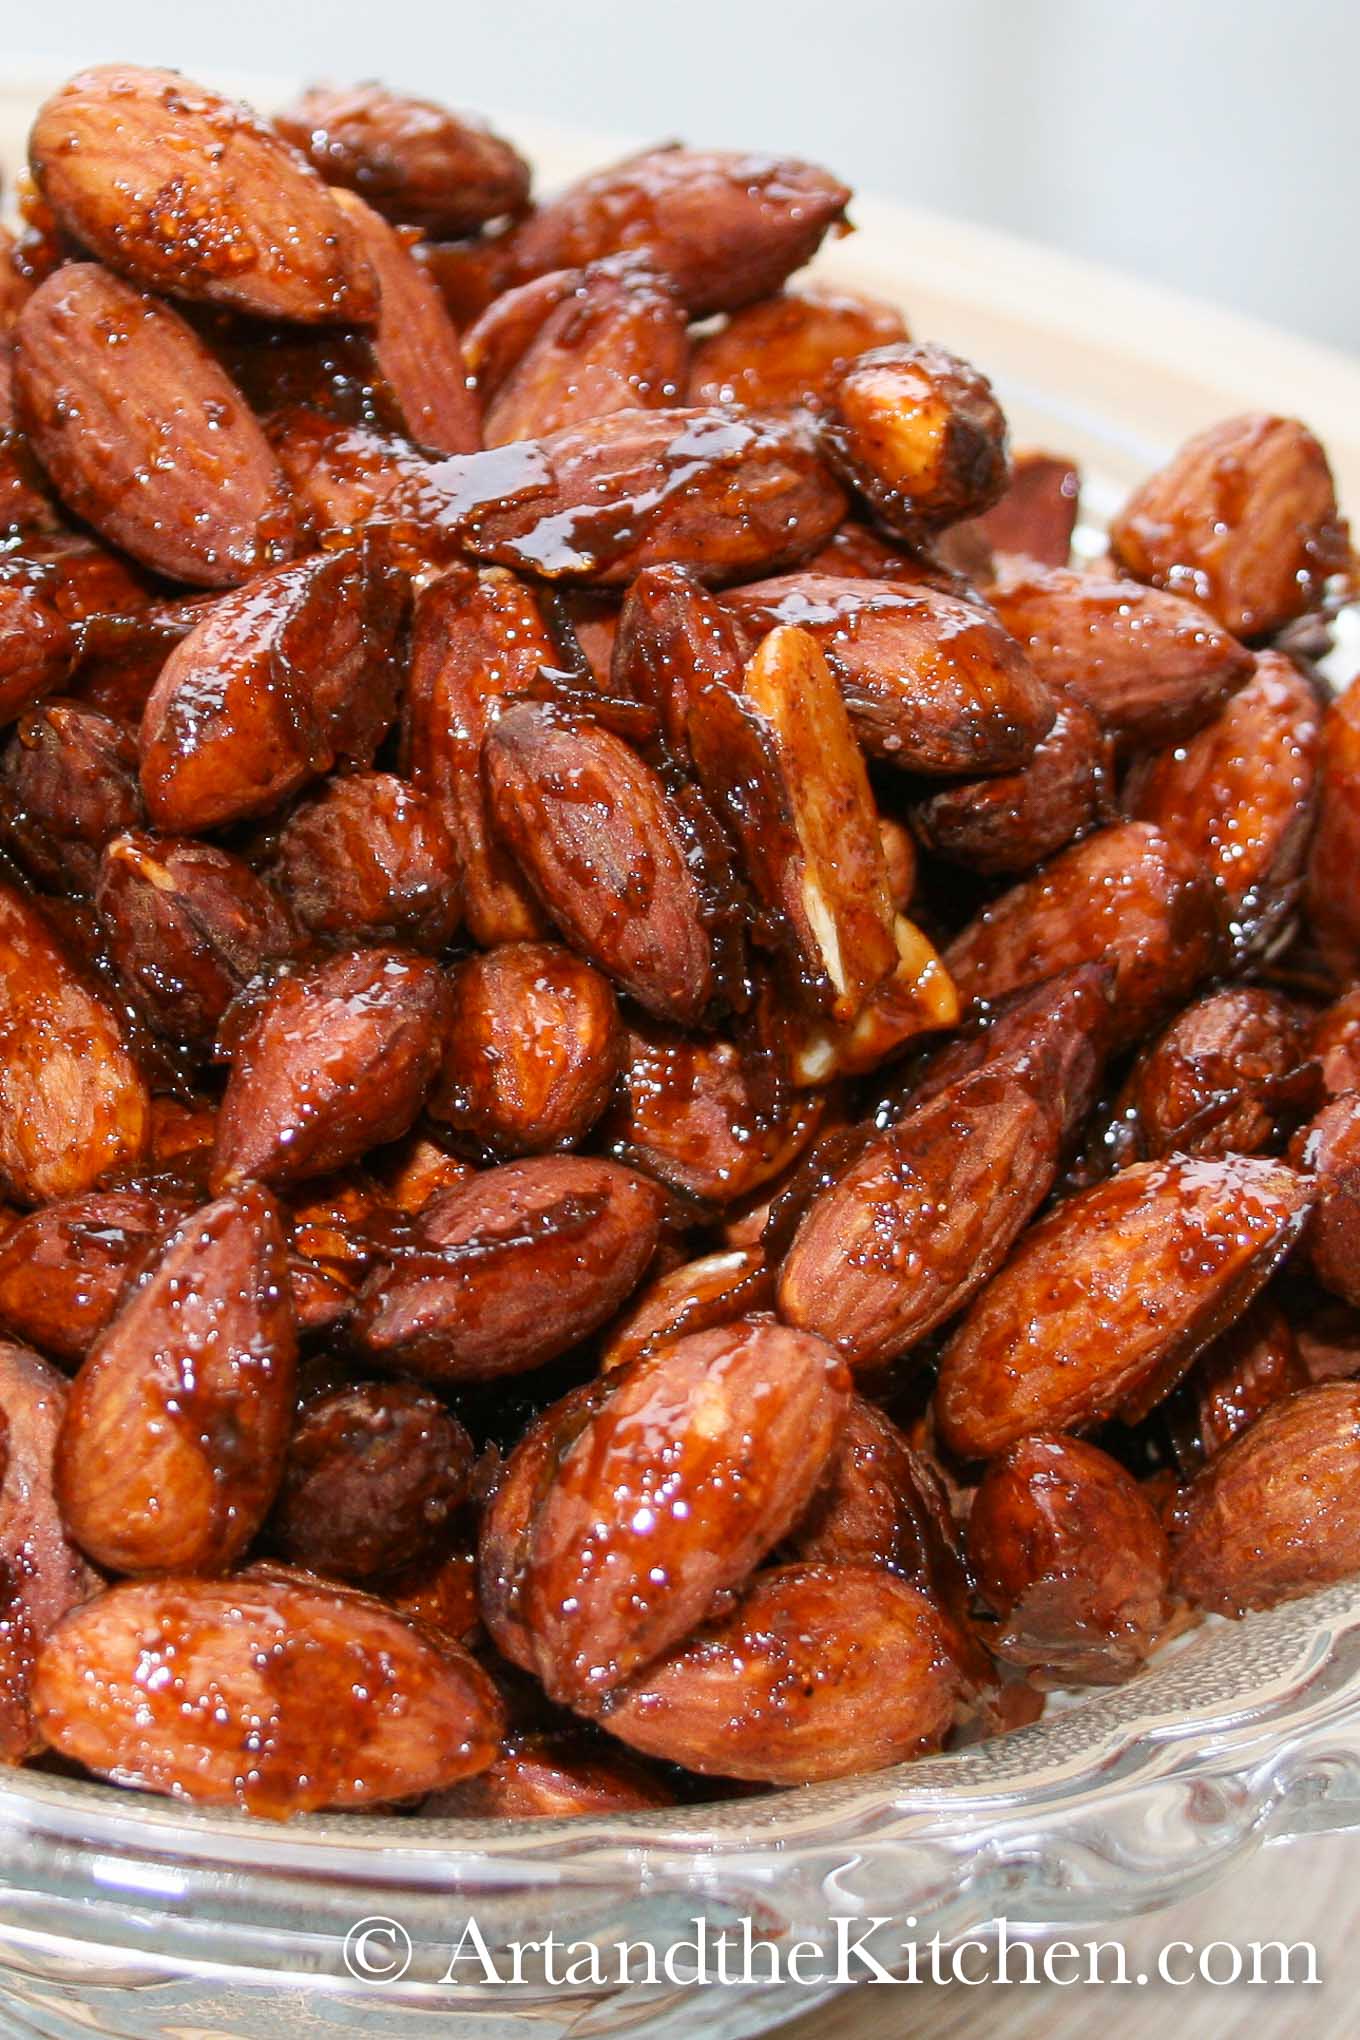 Roasted Spiced Almonds